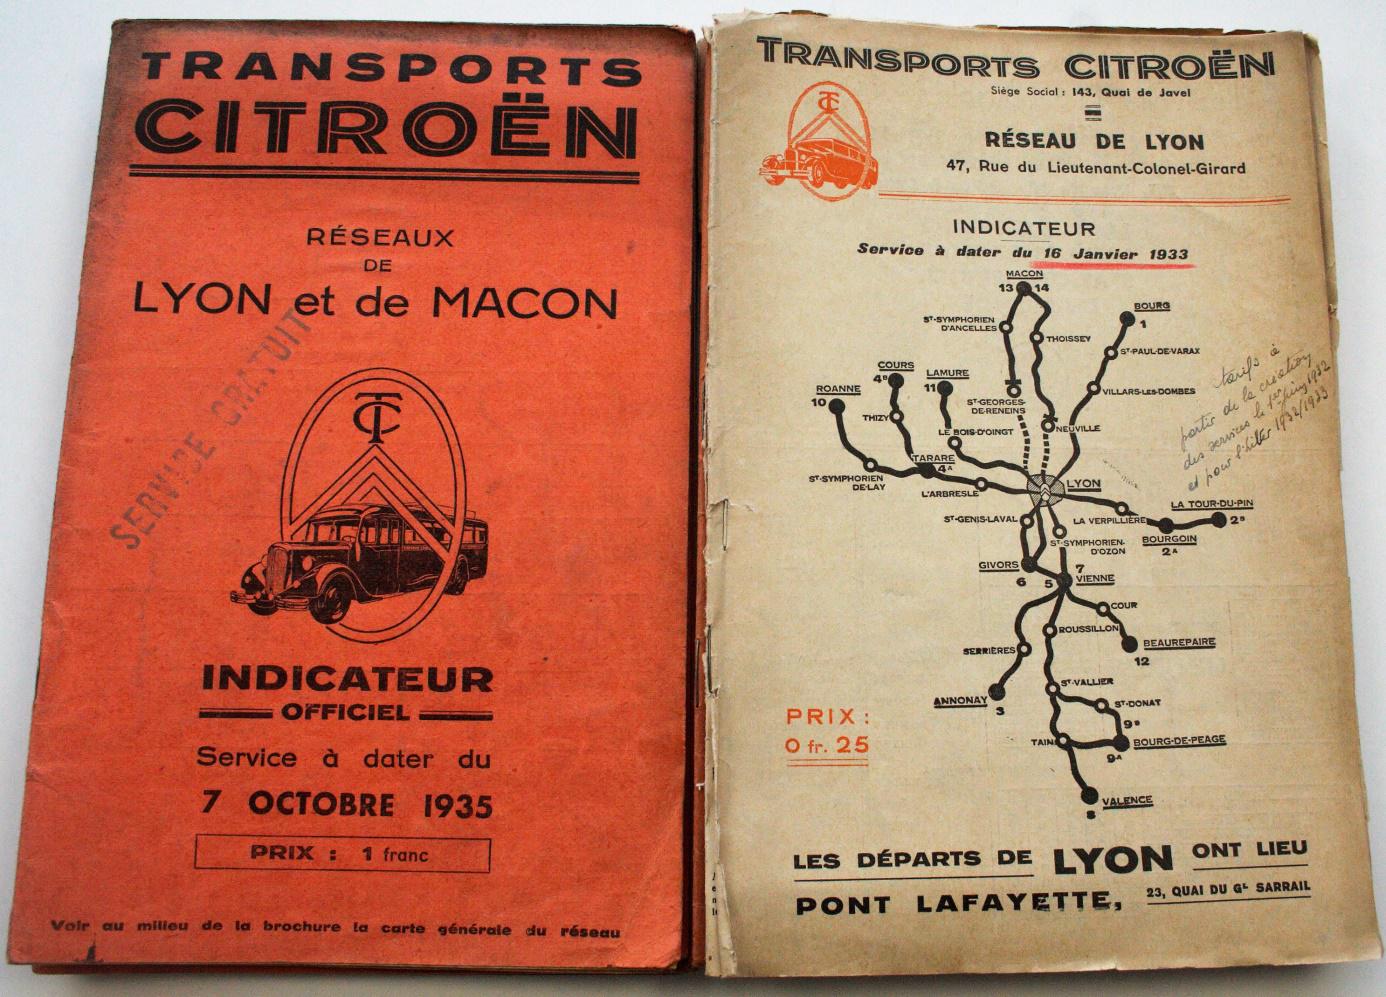 Lyon area timetable booklets for 1933 (right) and 1935 (left)